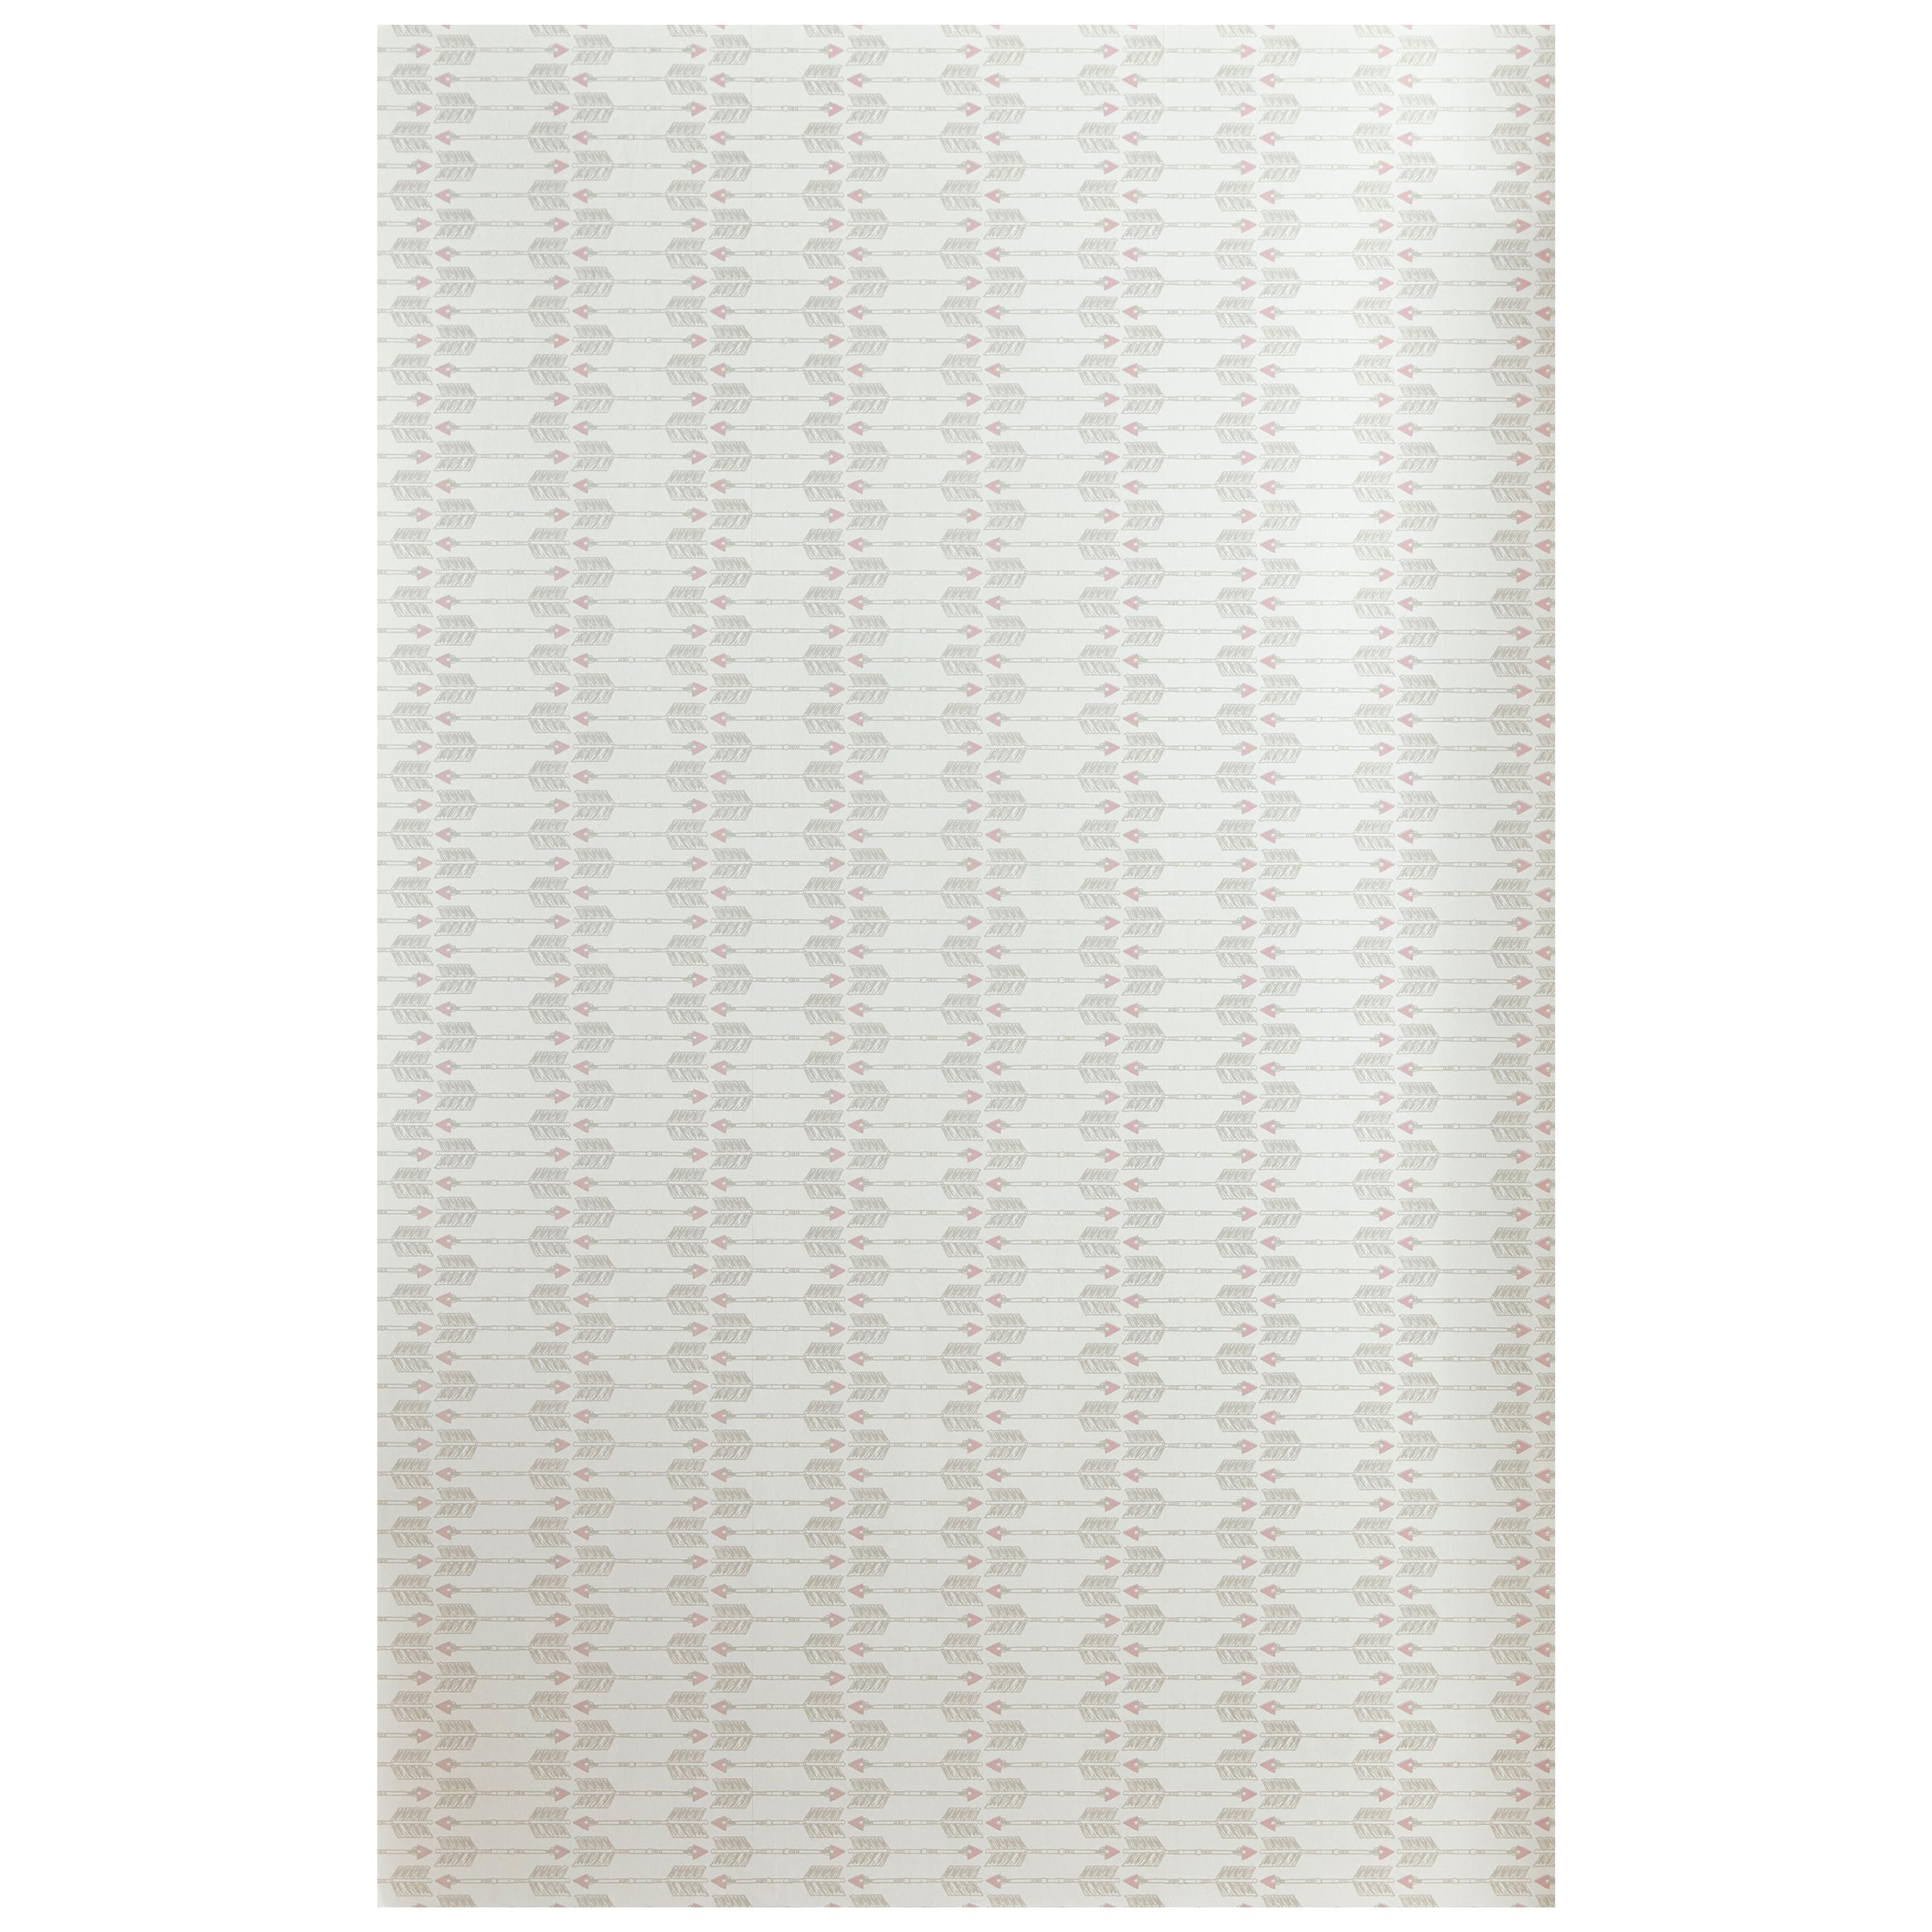 'Arrows' Contemporary, Traditional Wallpaper in Blush im Angebot